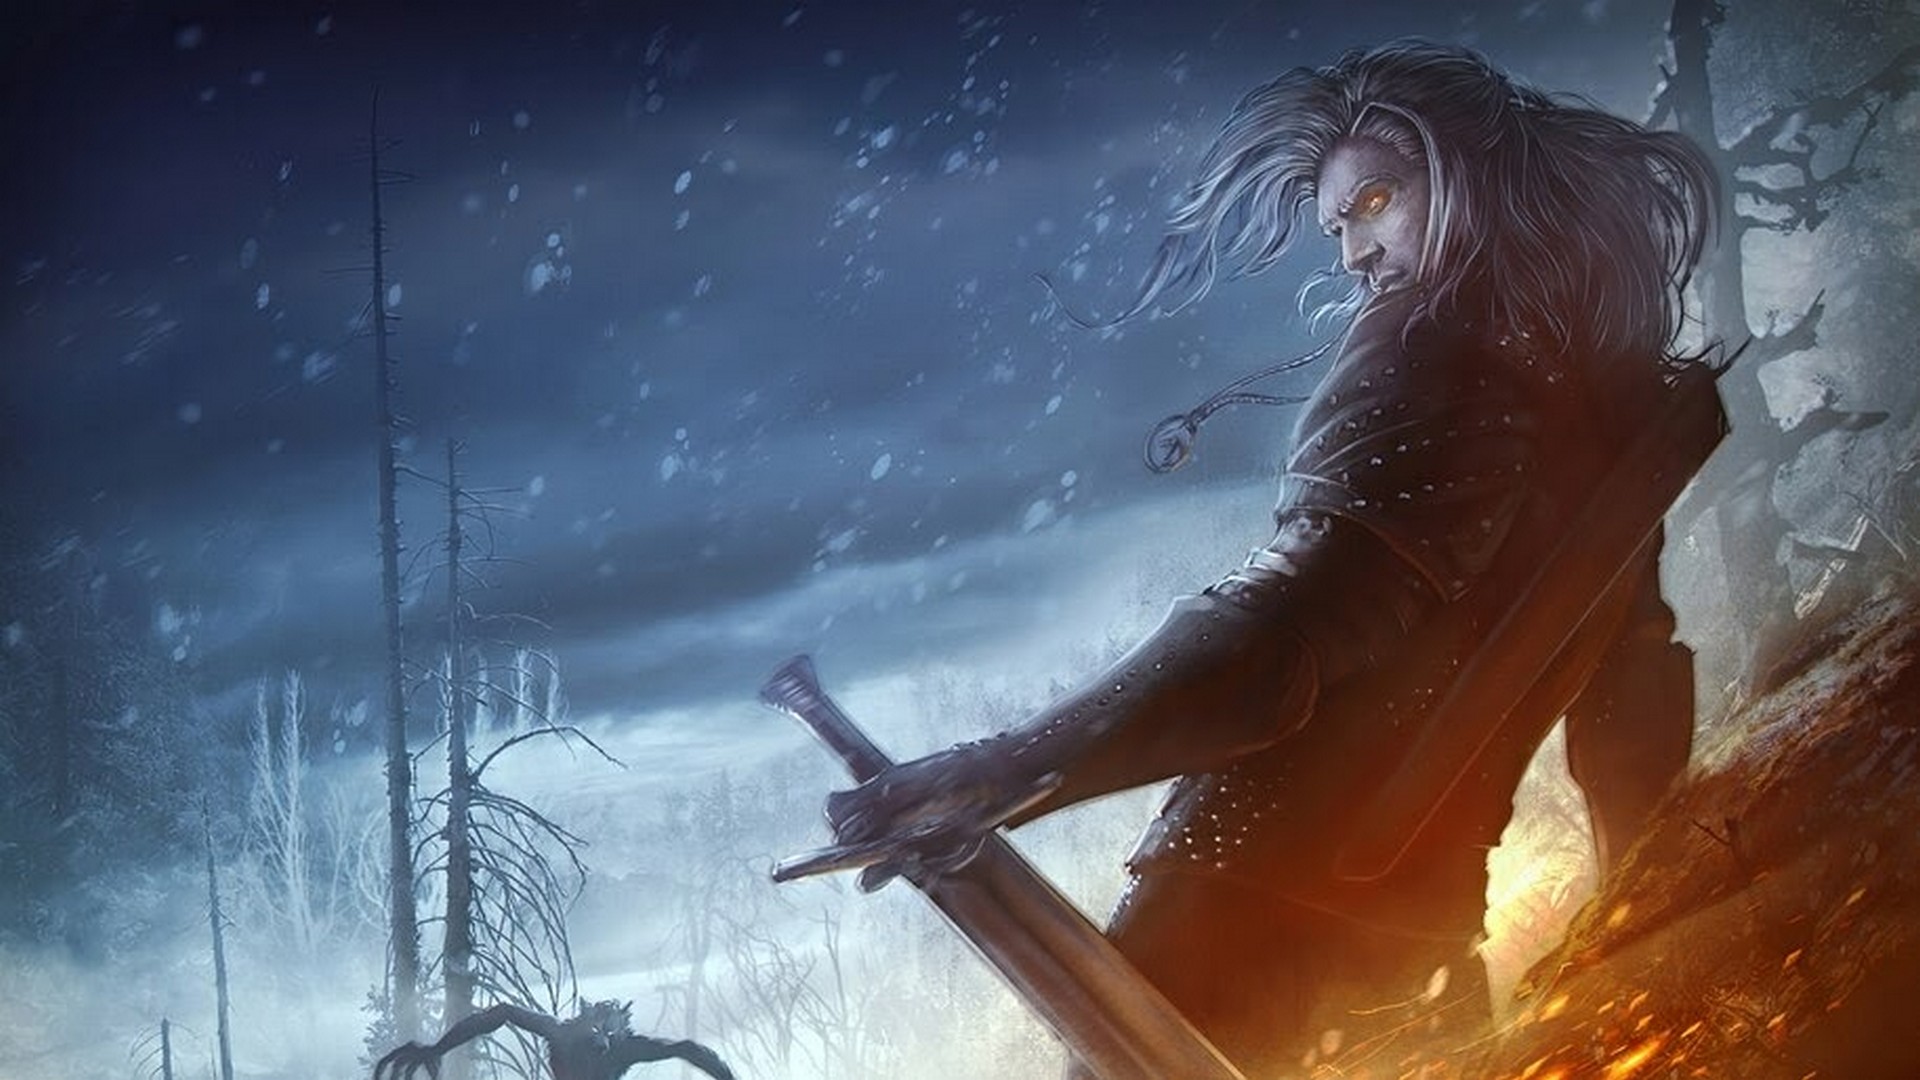 The Witcher Movies Wallpaper HD with high-resolution 1920x1080 pixel. You can use this poster wallpaper for your Desktop Computers, Mac Screensavers, Windows Backgrounds, iPhone Wallpapers, Tablet or Android Lock screen and another Mobile device